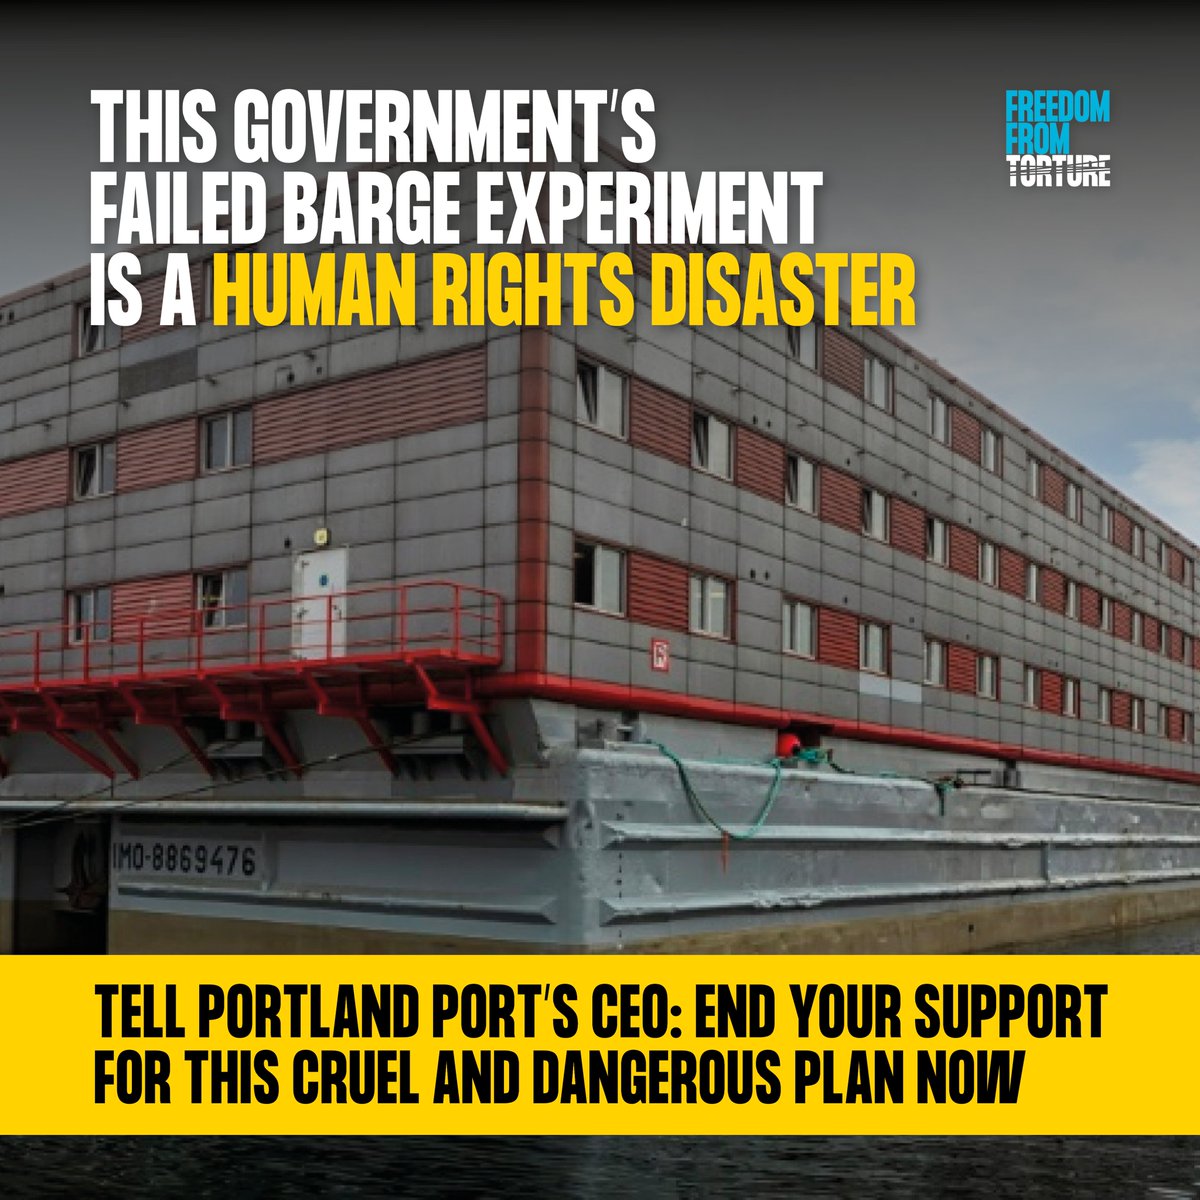 🚨 BREAKING: This government's barge was found to have too few fire escapes, a lack of fire drills & problems with air vents - in short, a 'potential death trap' Join over 20K people telling Portland Port's CEO: end your support for this cruel plan now 👇 secure.freedomfromtorture.org/page/130883/pe…